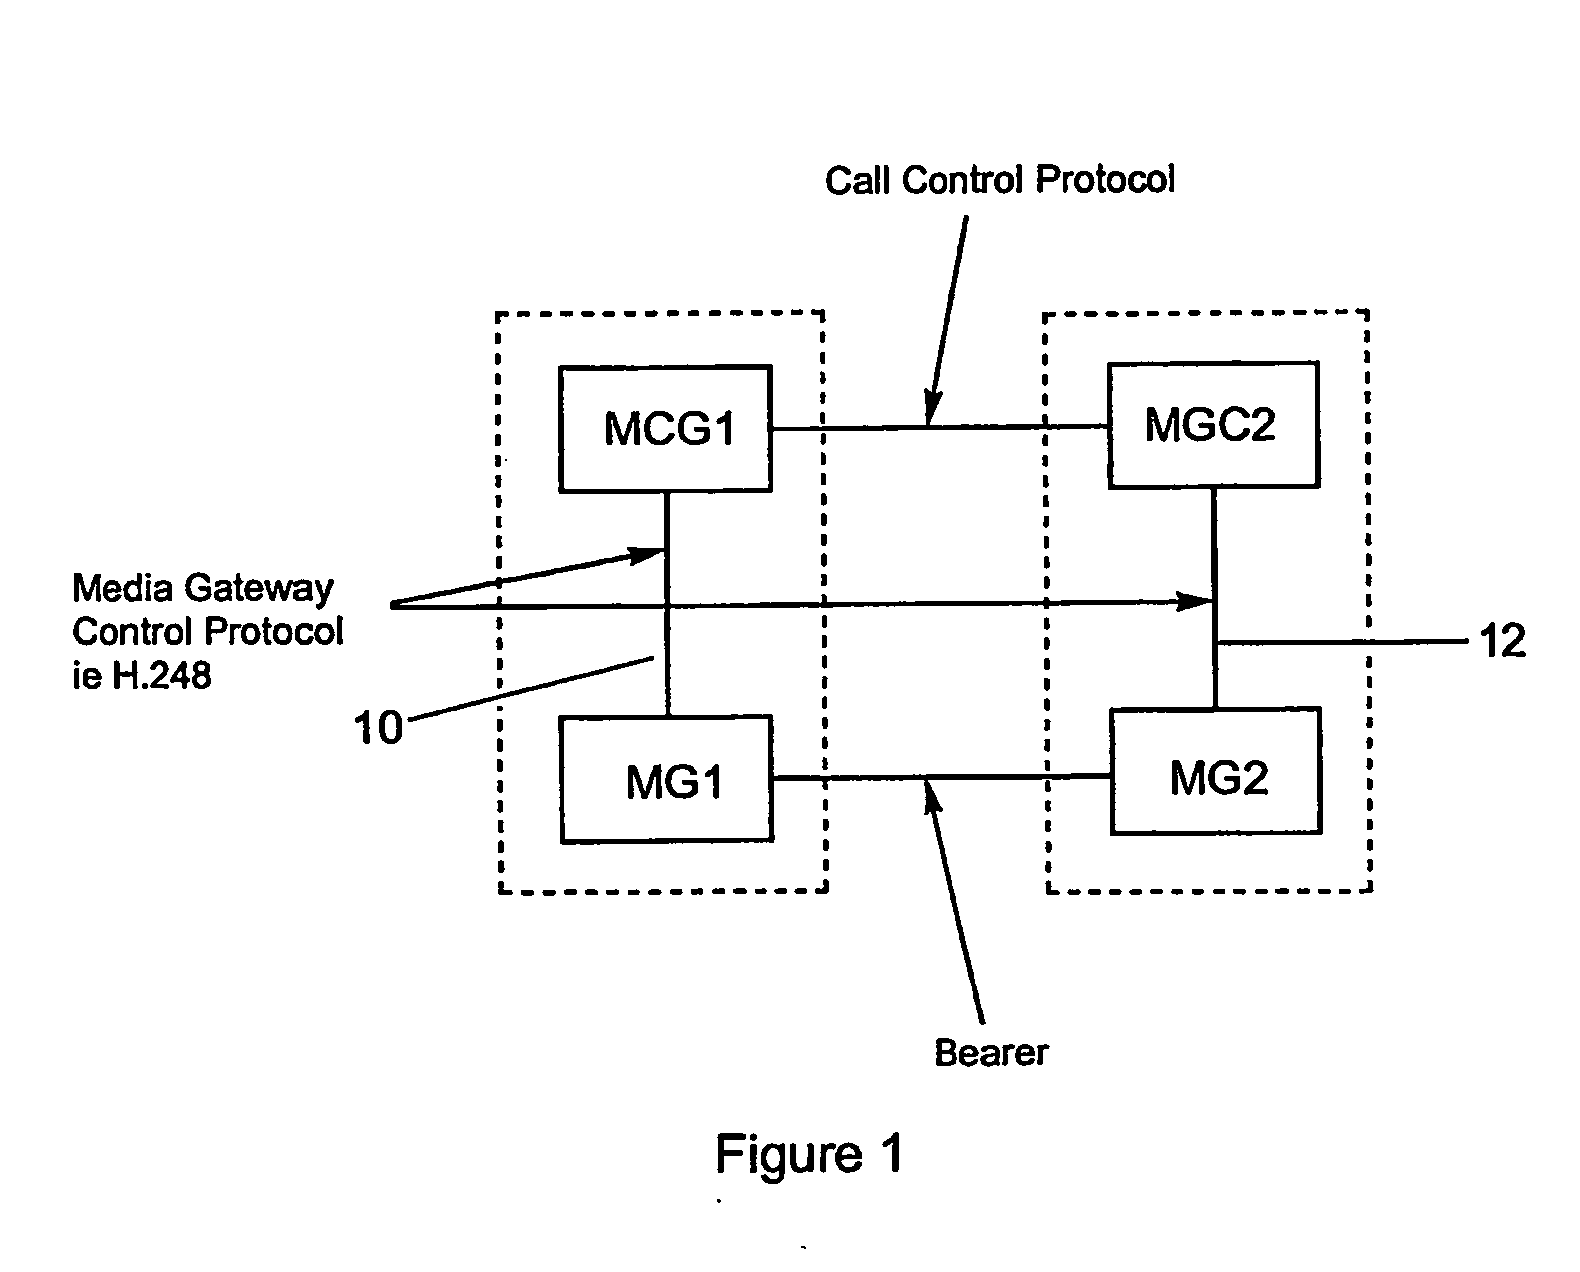 Method and system of managing a call in a telecommunication system